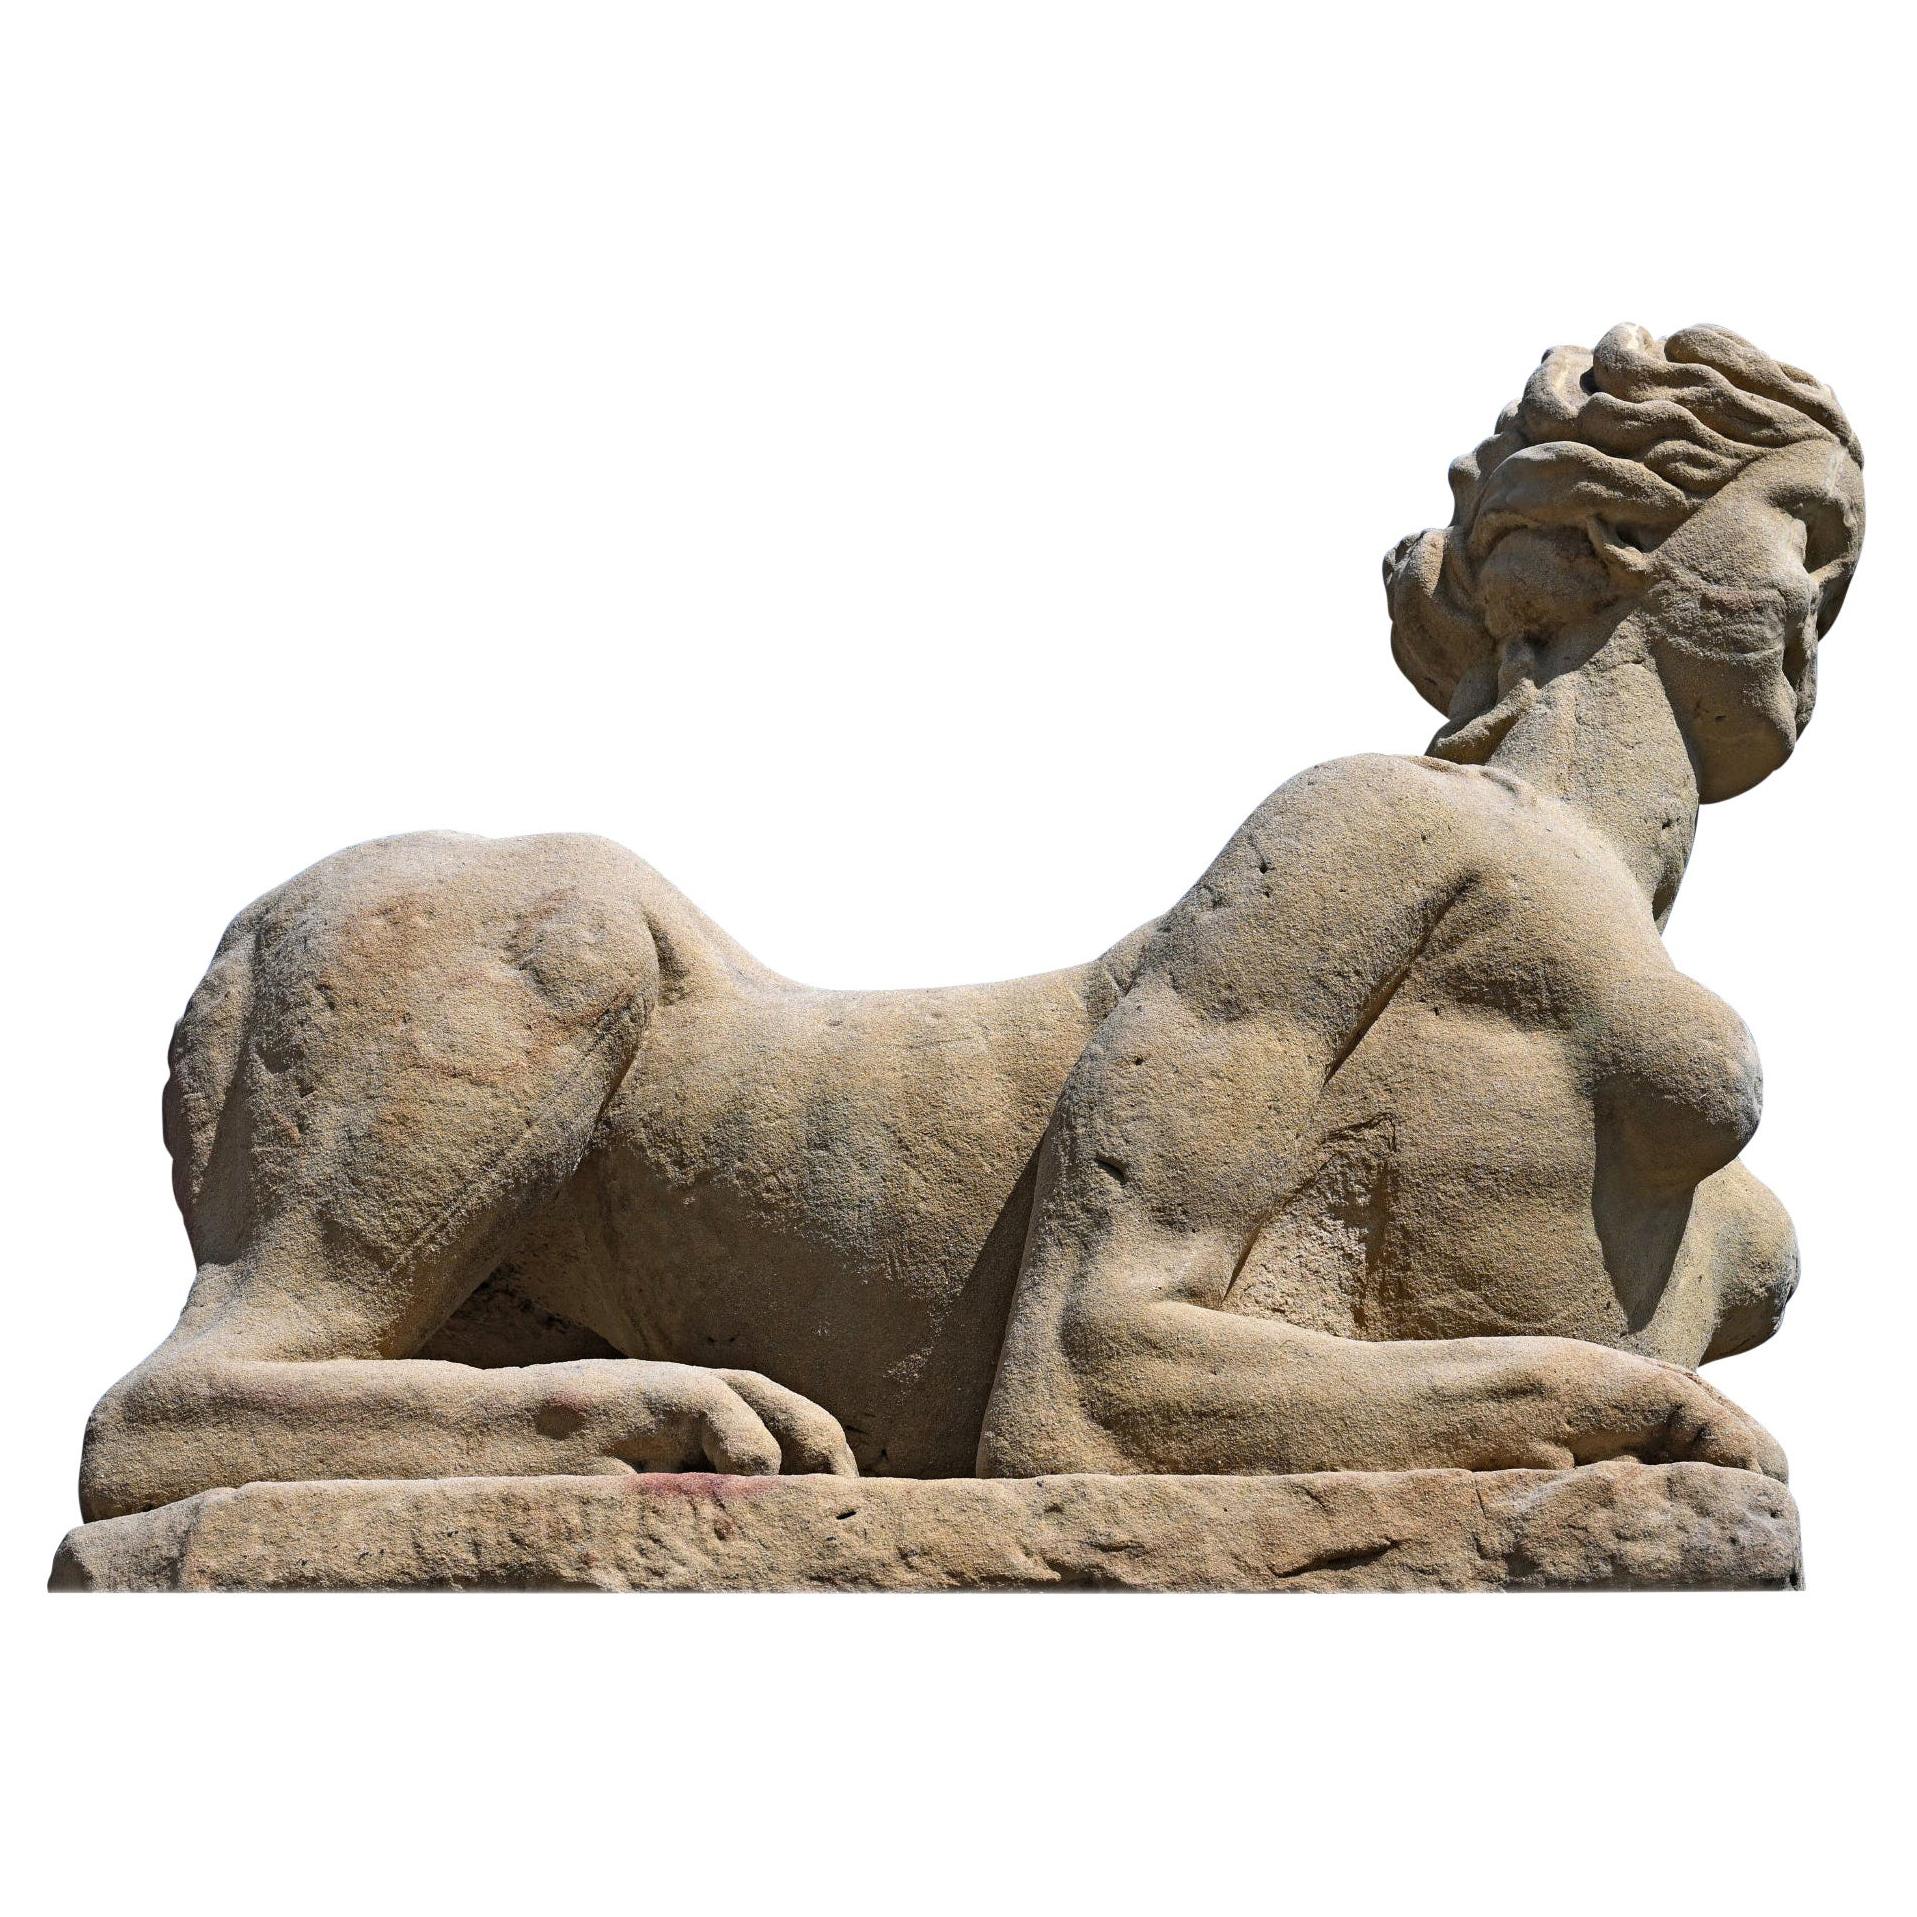 Early 18th Century Sphinx Florence around 1700 Sandstone Garden and Park Object